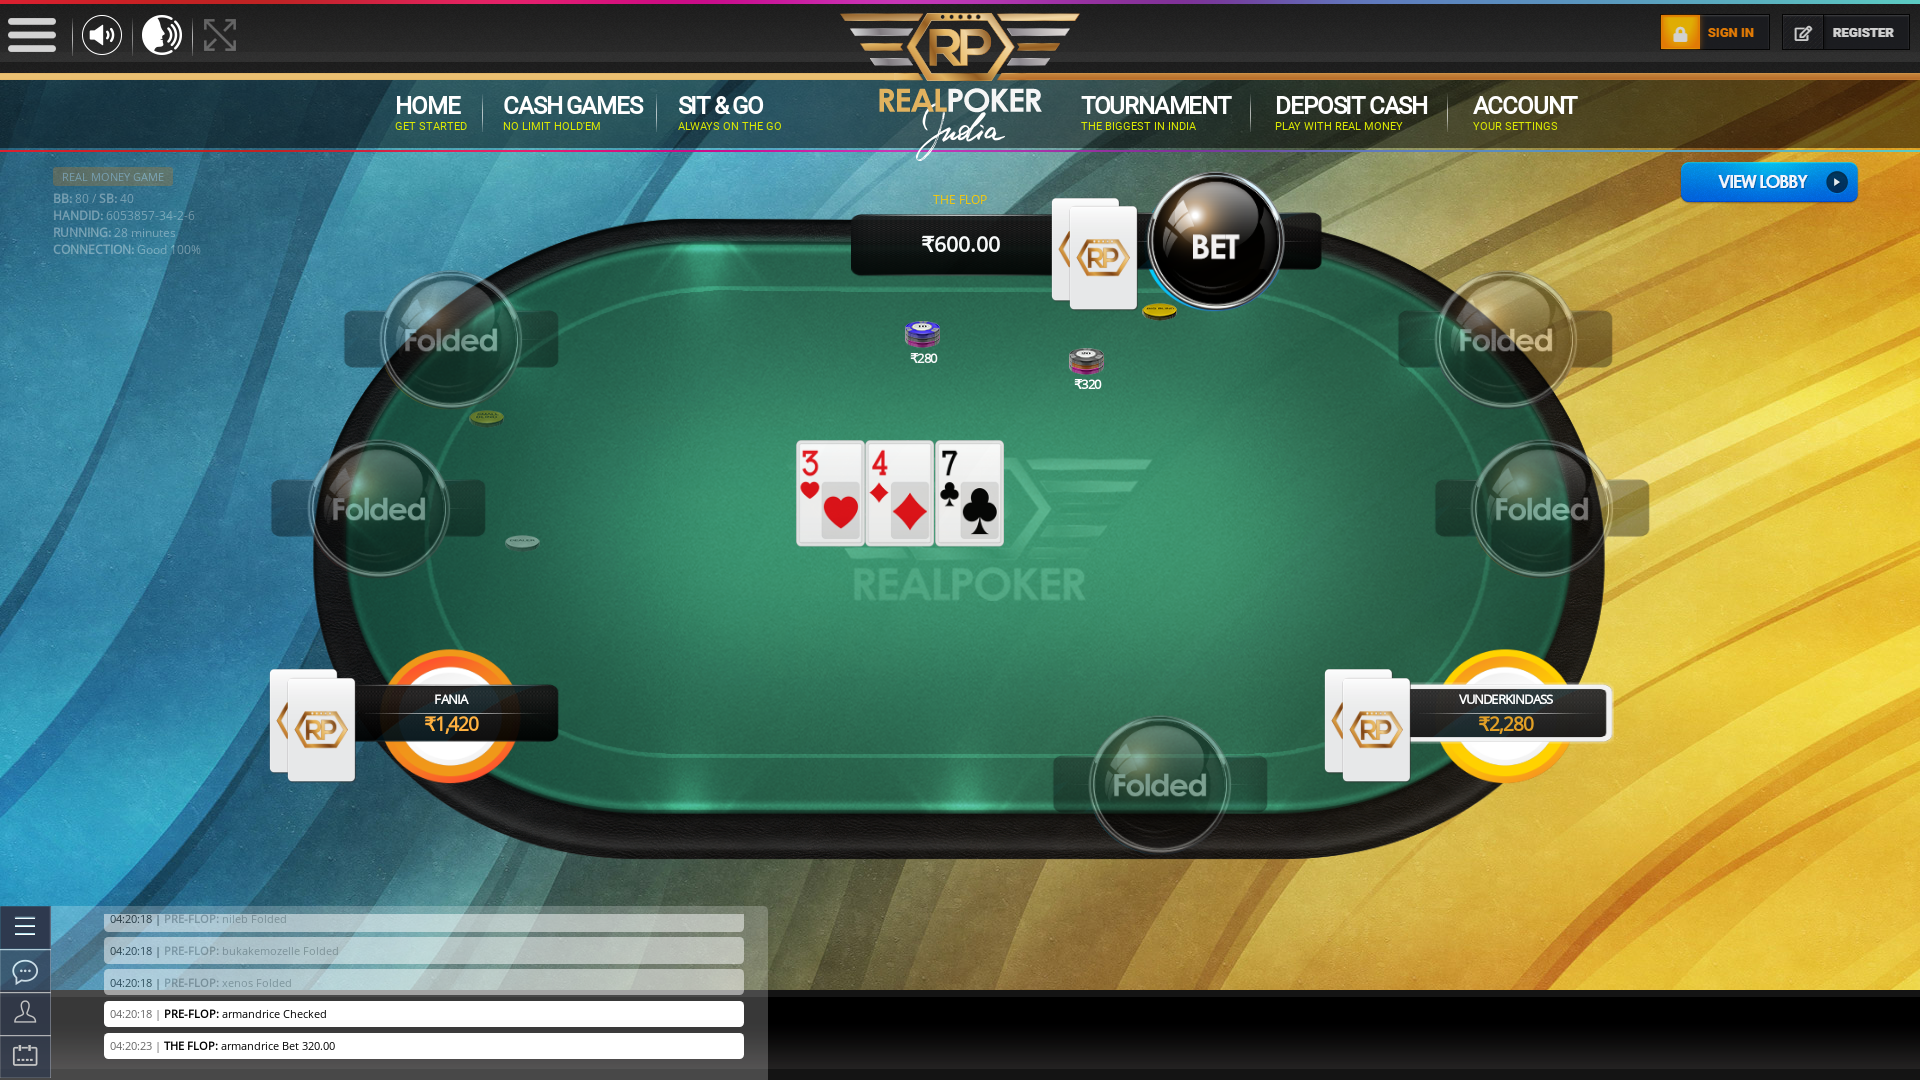 Real poker 10 player table in the 27th minute of the match